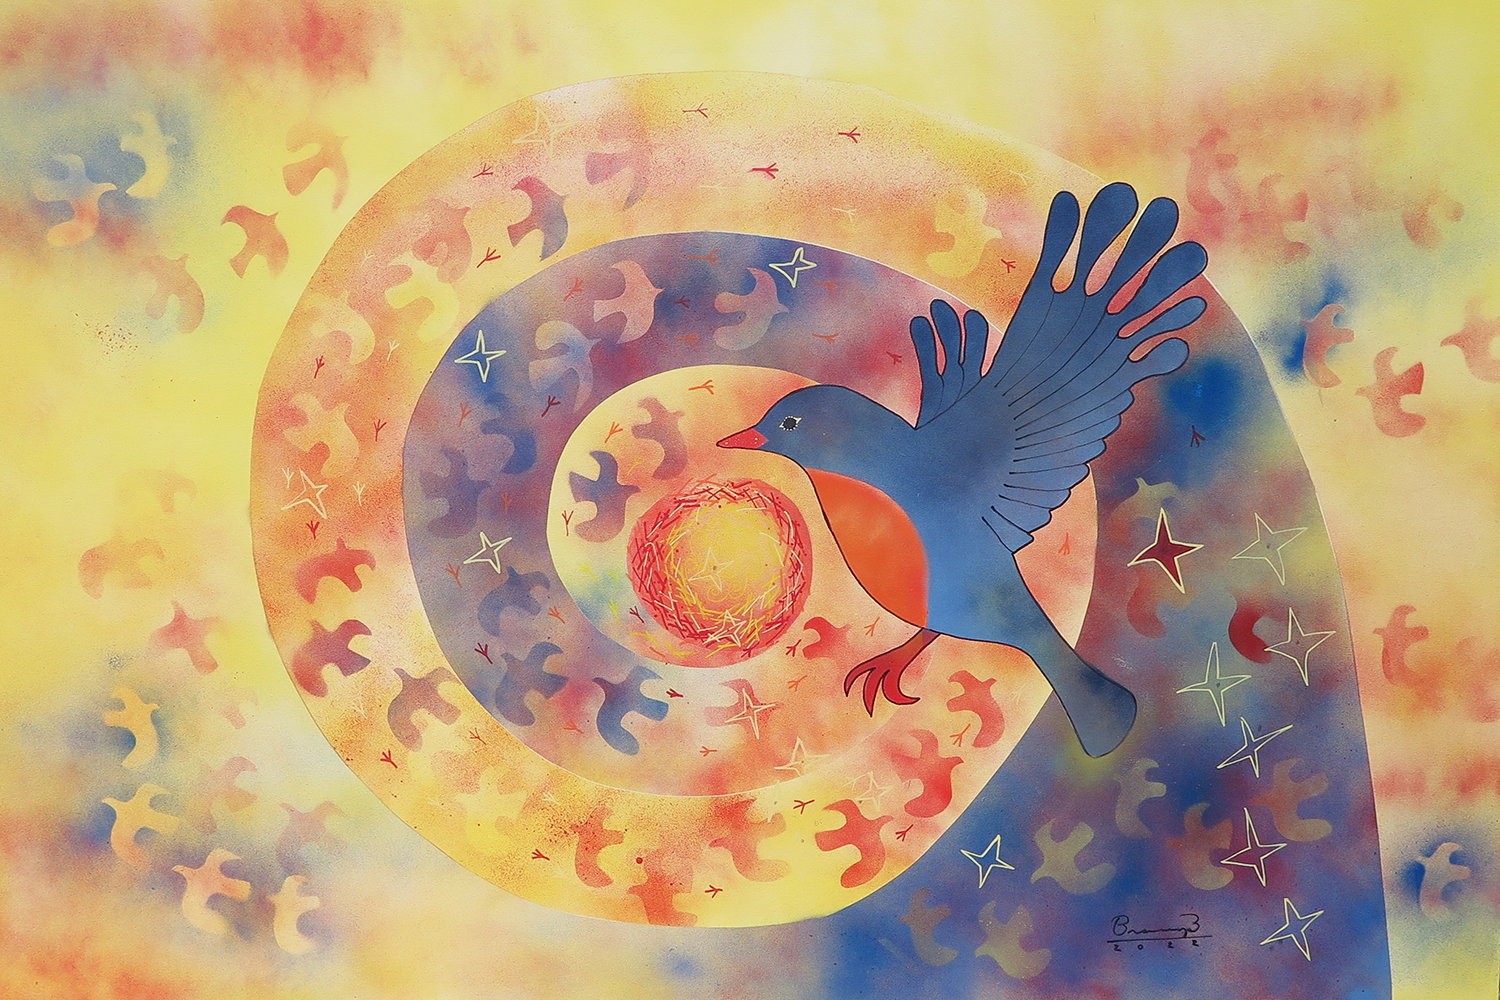 Painting of a robin’s nest and a robin with outstretched wings, surrounded by a spiral of yellow, orange, red and blue.